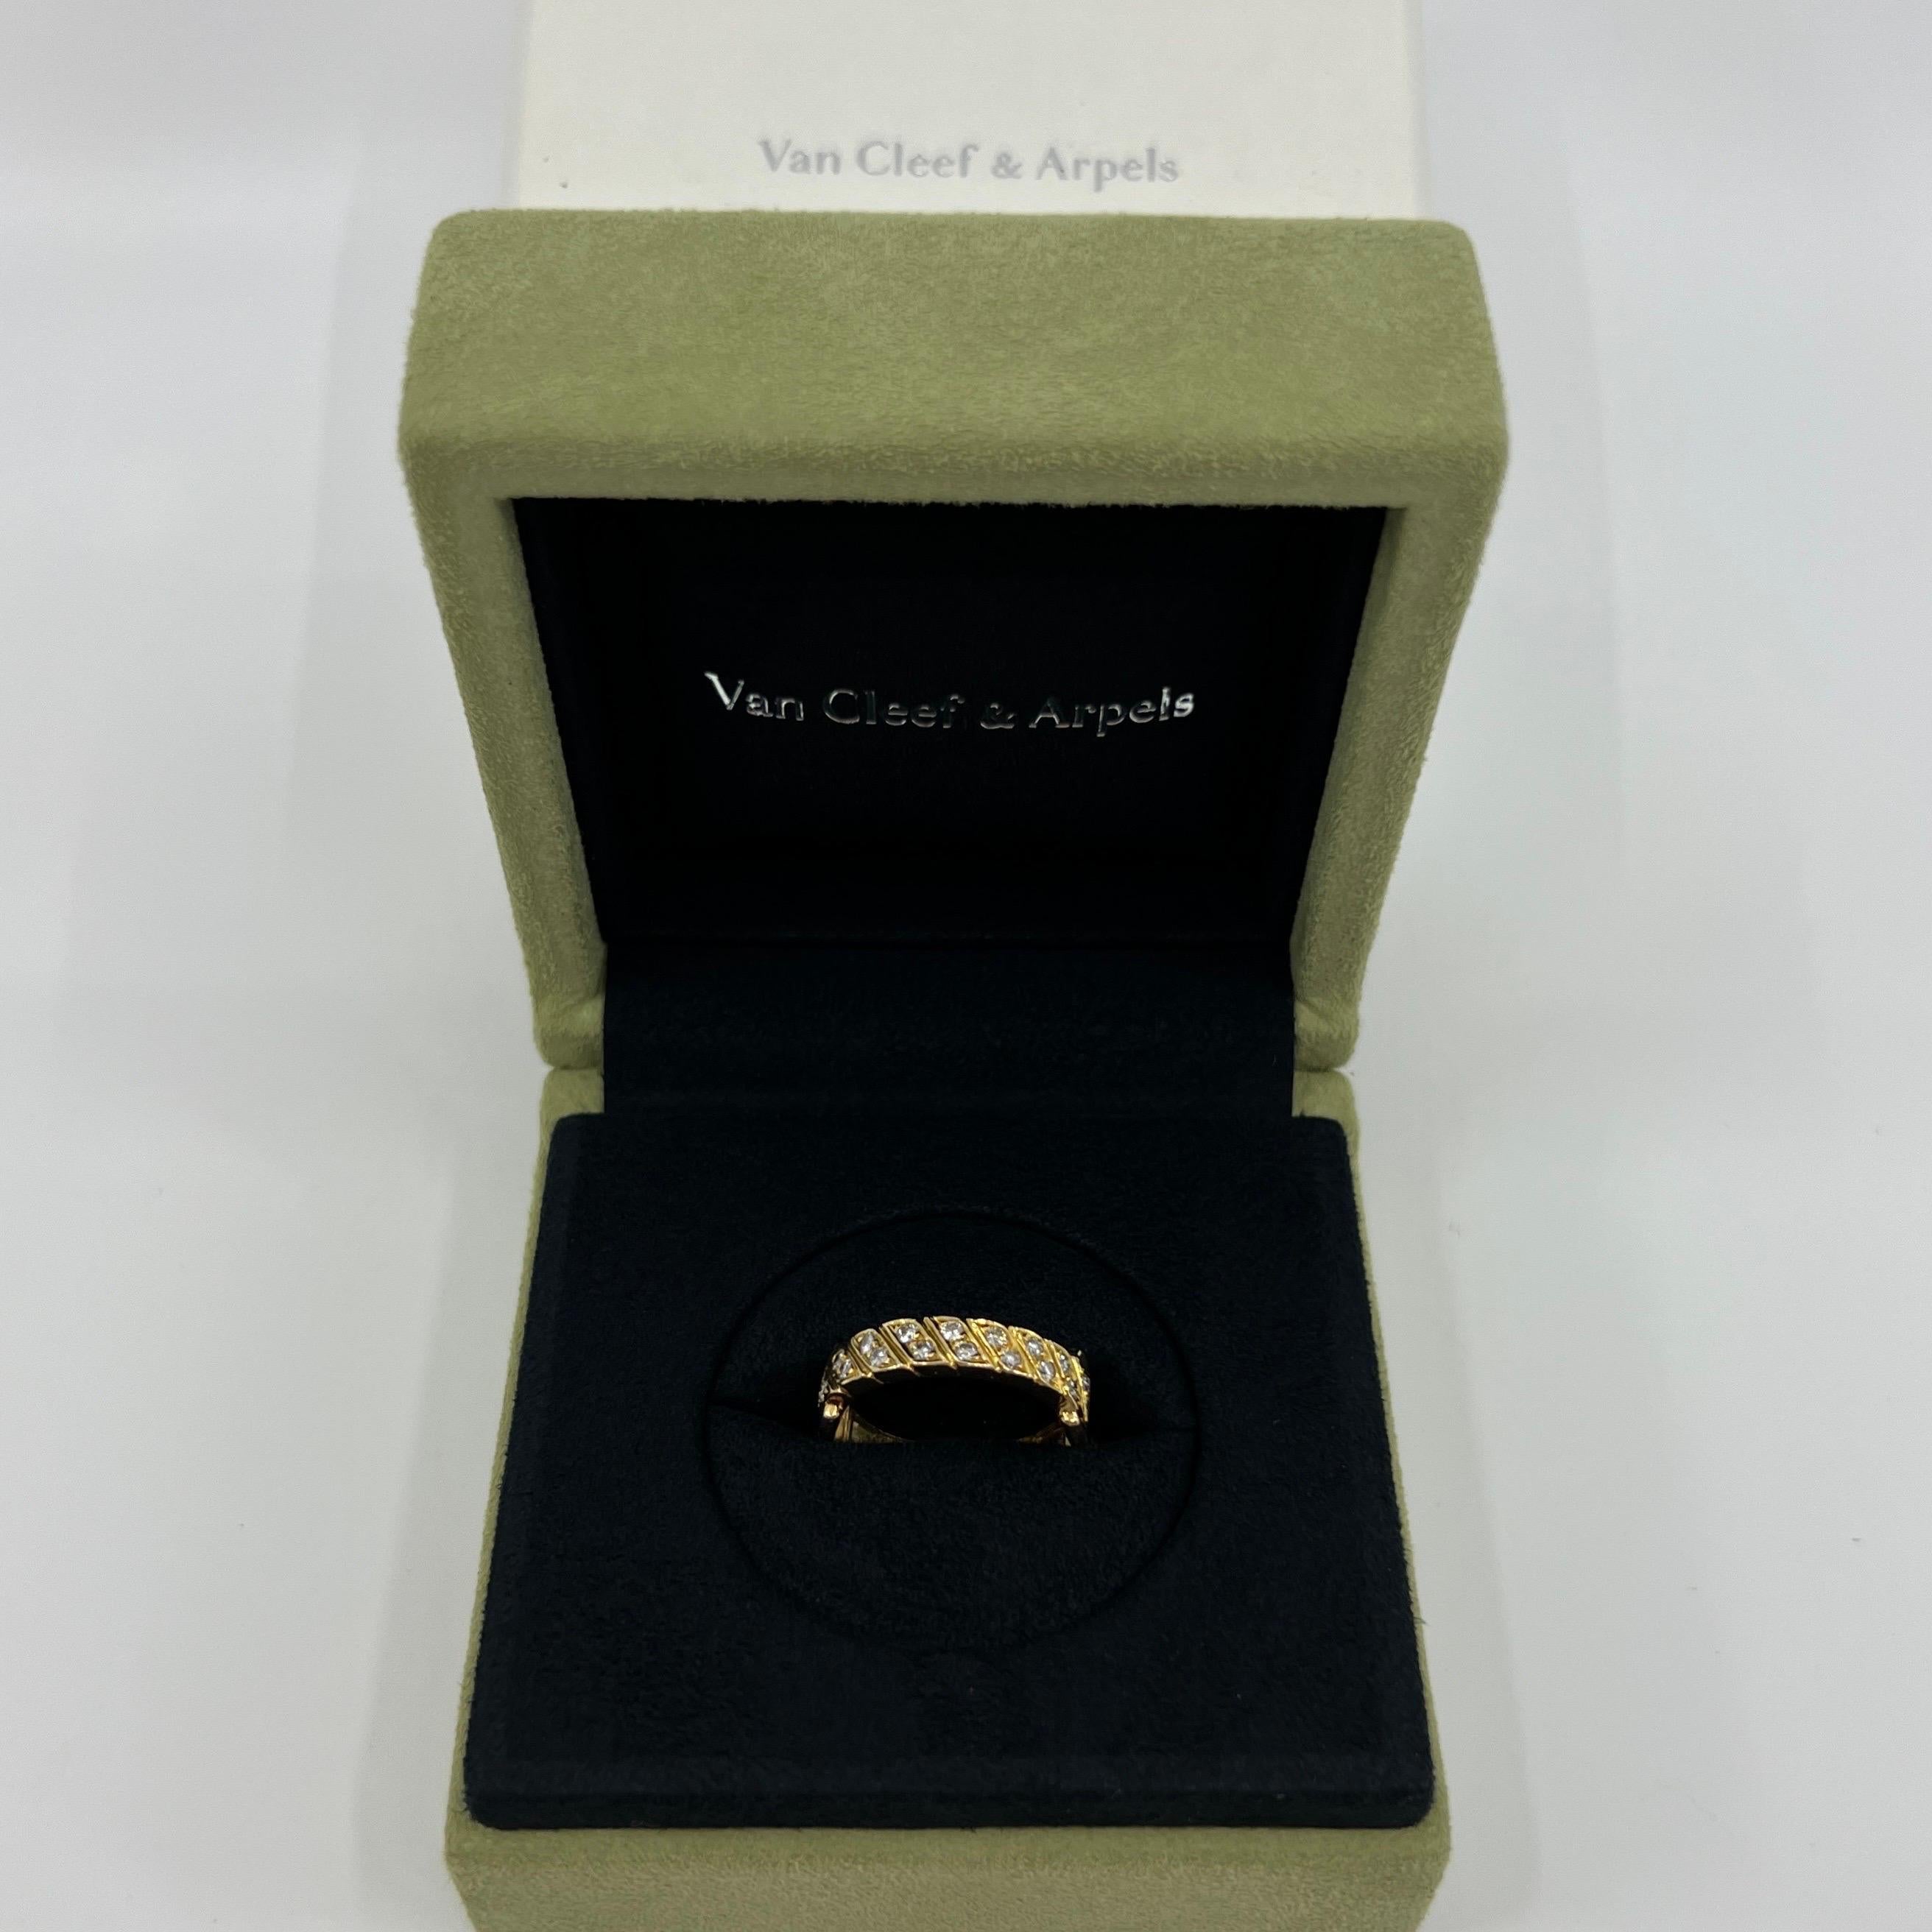 Very Rare Vintage Van Cleef & Arpels 18k Yellow Gold Diamond Buckle Band Ring.

This beautifully made ring featuring round brilliant cut diamonds in a belt/buckle style band ring.

The diamonds are of excellent quality. Fine jewellery houses like